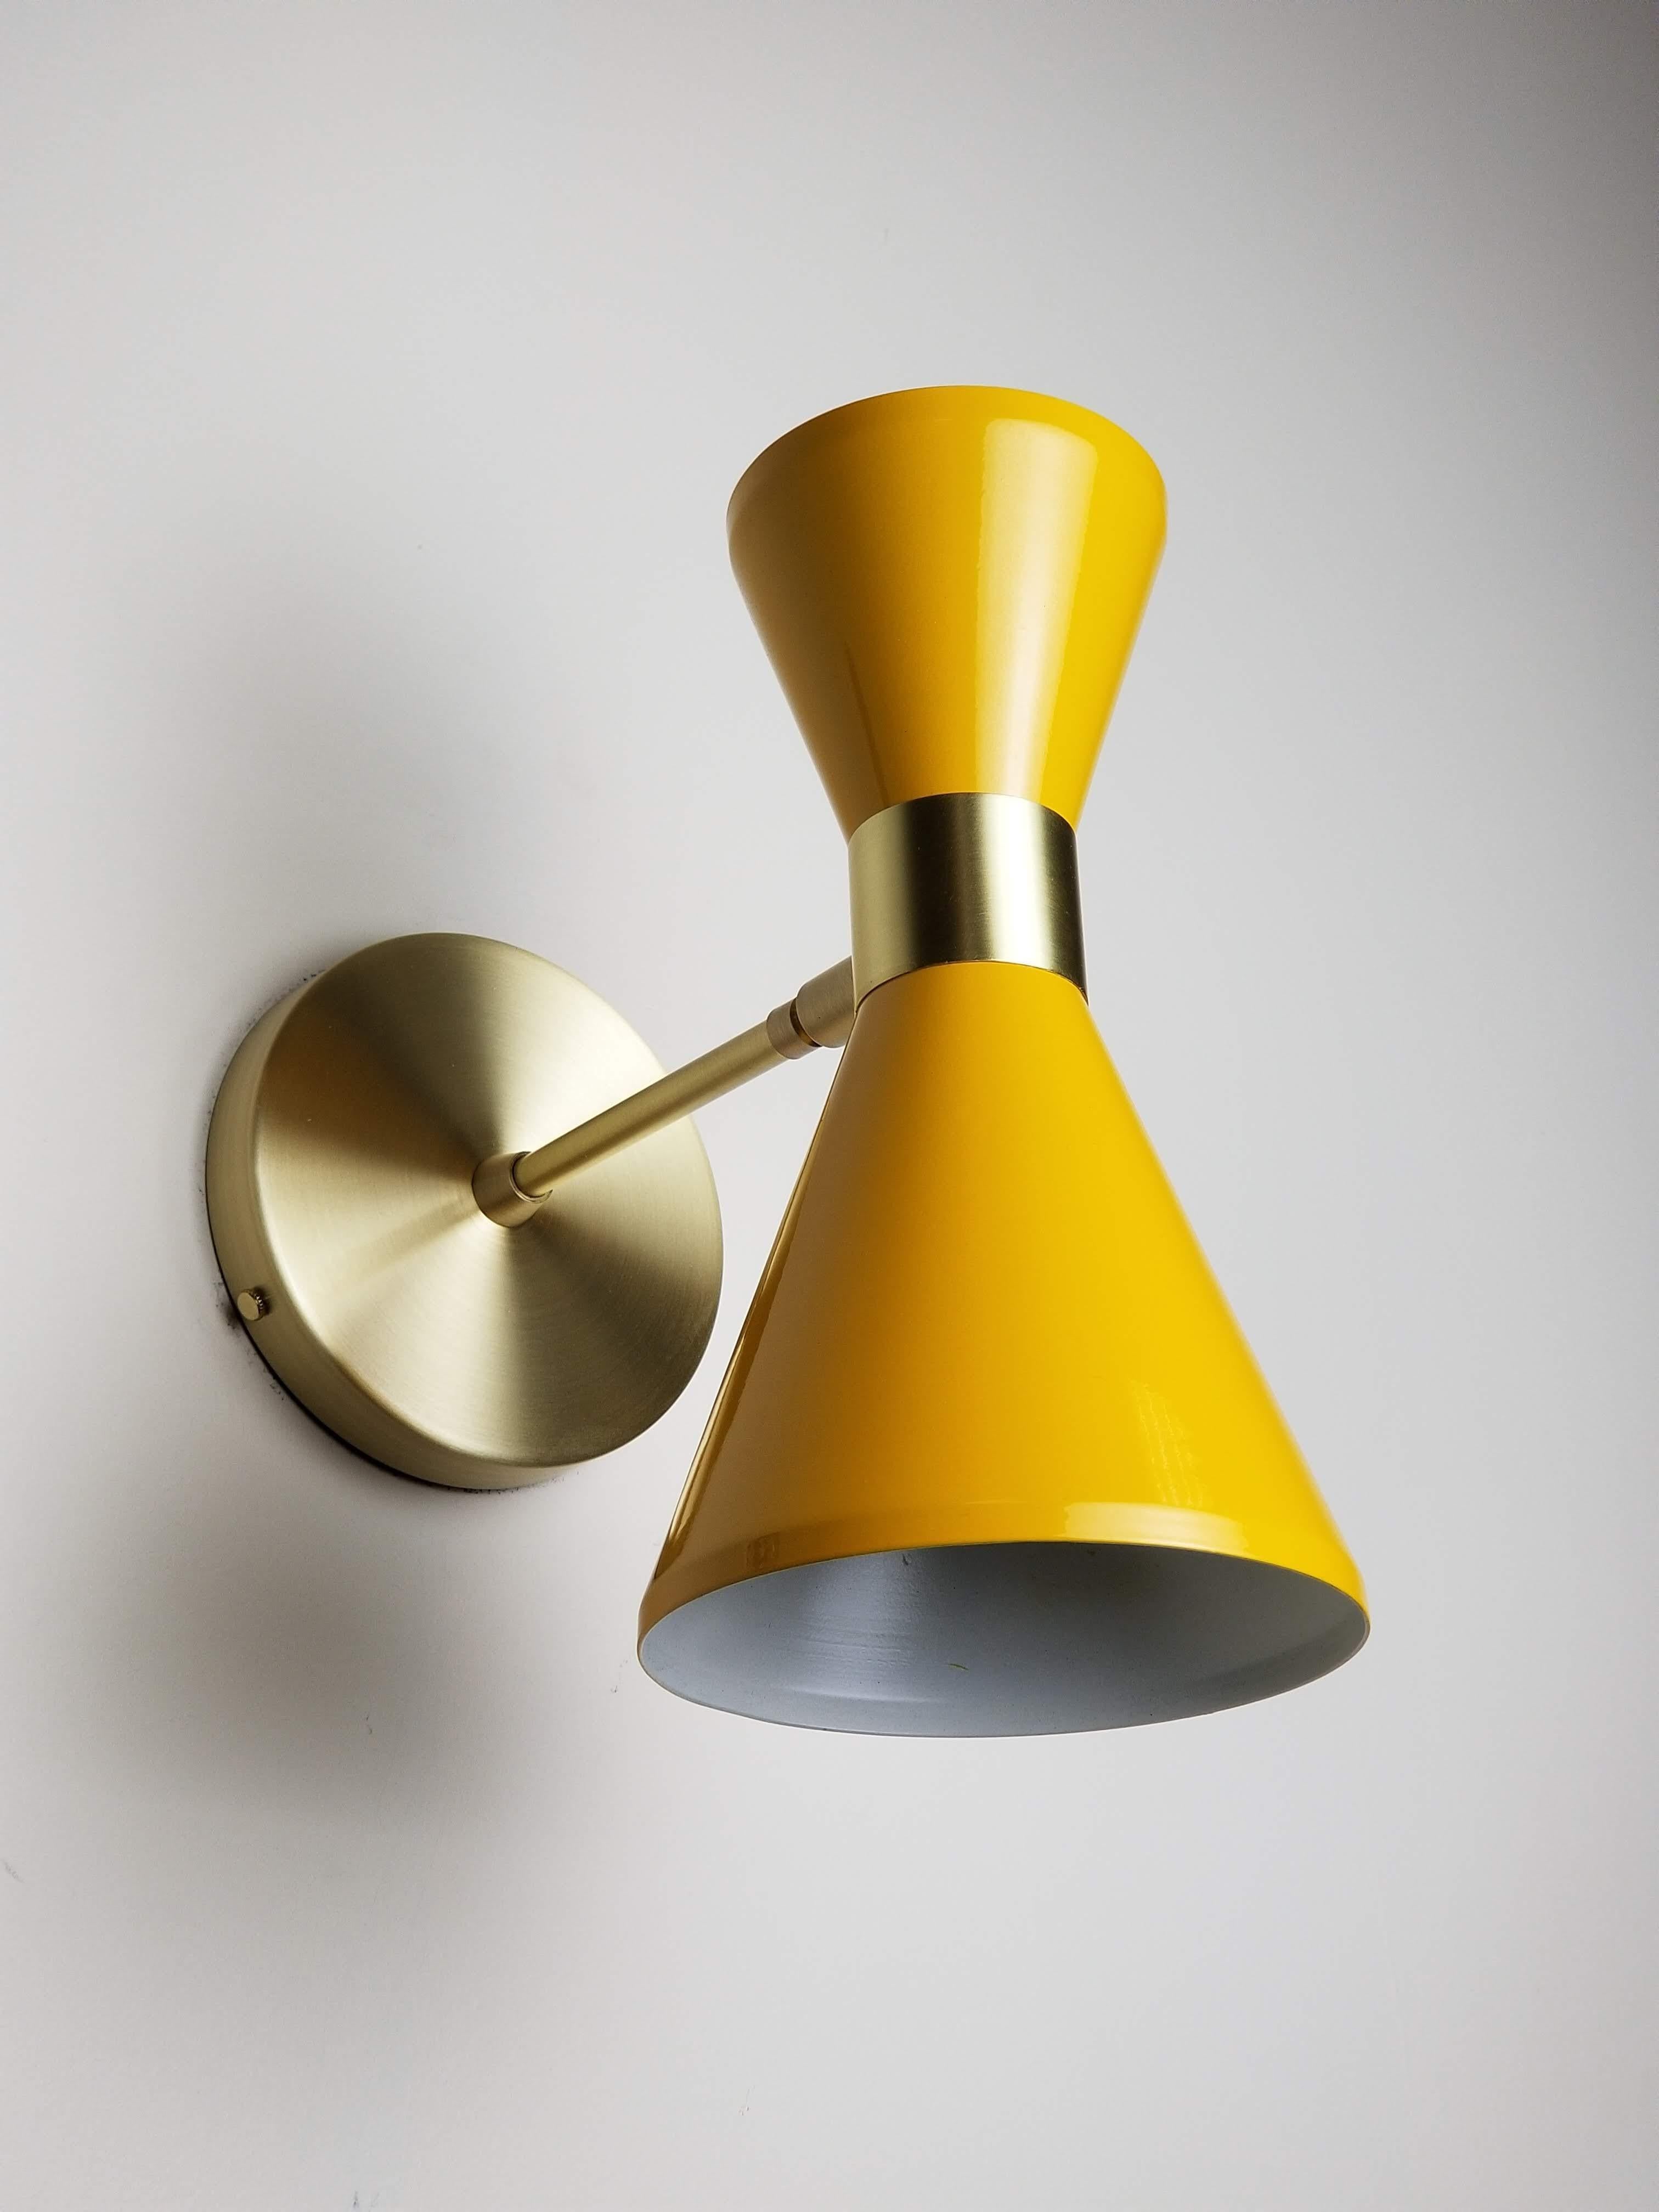 The Campana wall sconce or reading light shown in natural brass and saffron enamel fabricated in NYC by Blueprint Lighting, 2018. The wide band and distinctly bevelled edge makes the Campana a strong design statement. Swiveling head allows for cone